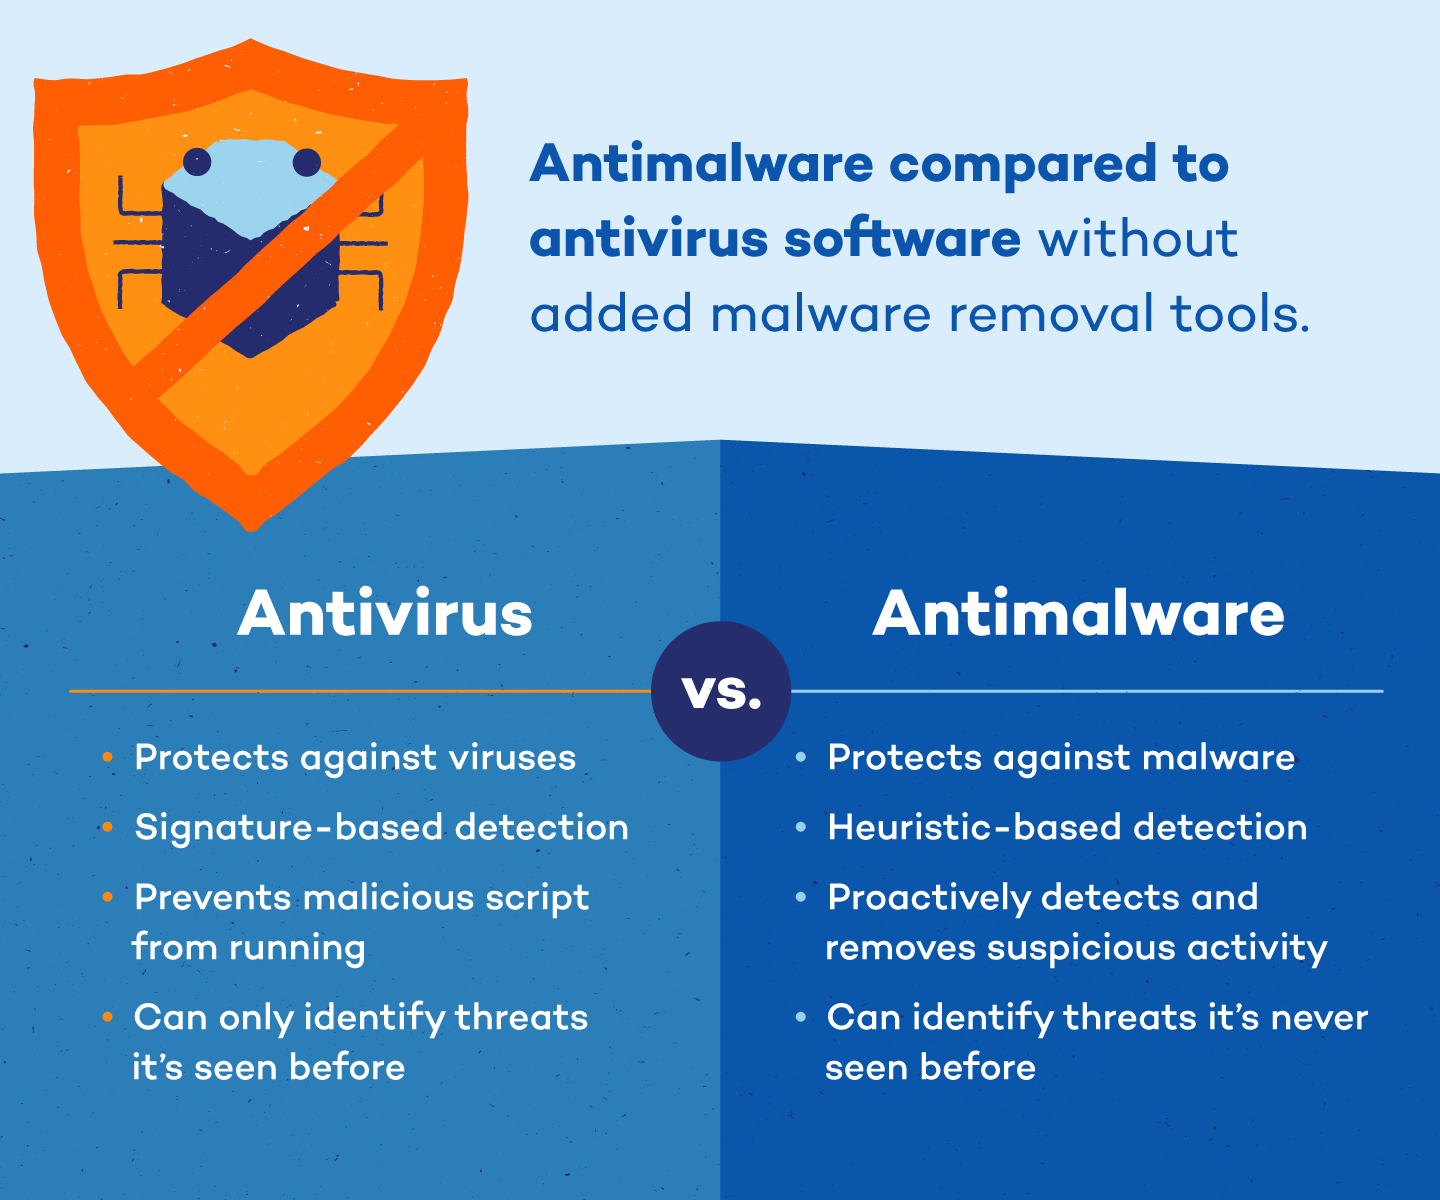 Run an antivirus or anti-malware scan on your computer to check for any malicious software that may be interfering with Beyond Compare.exe.
If any threats are detected, follow the instructions provided by your security software to remove them.